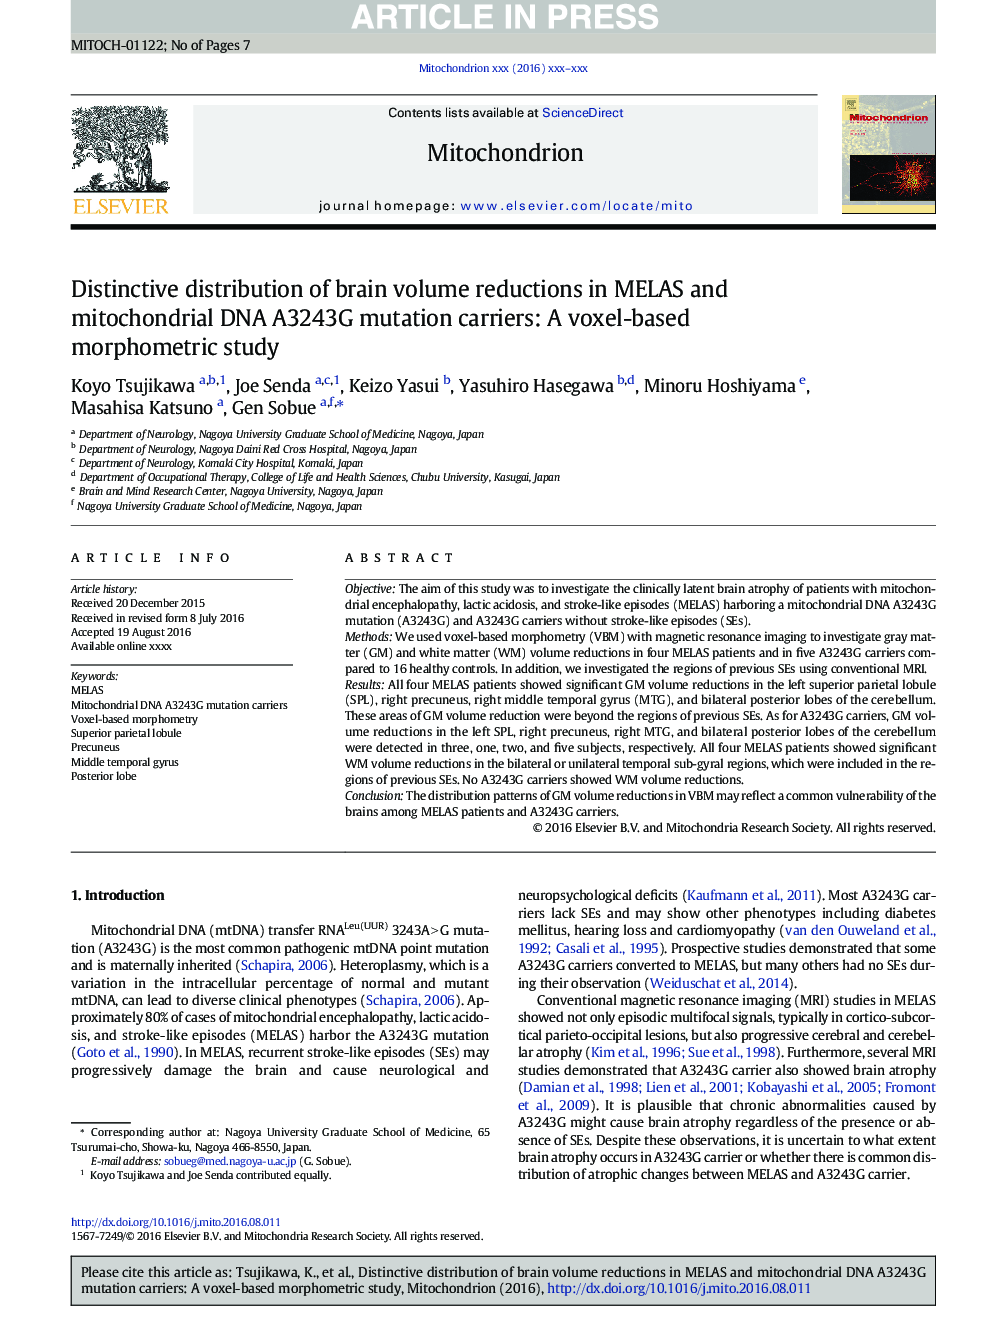 Distinctive distribution of brain volume reductions in MELAS and mitochondrial DNA A3243G mutation carriers: A voxel-based morphometric study